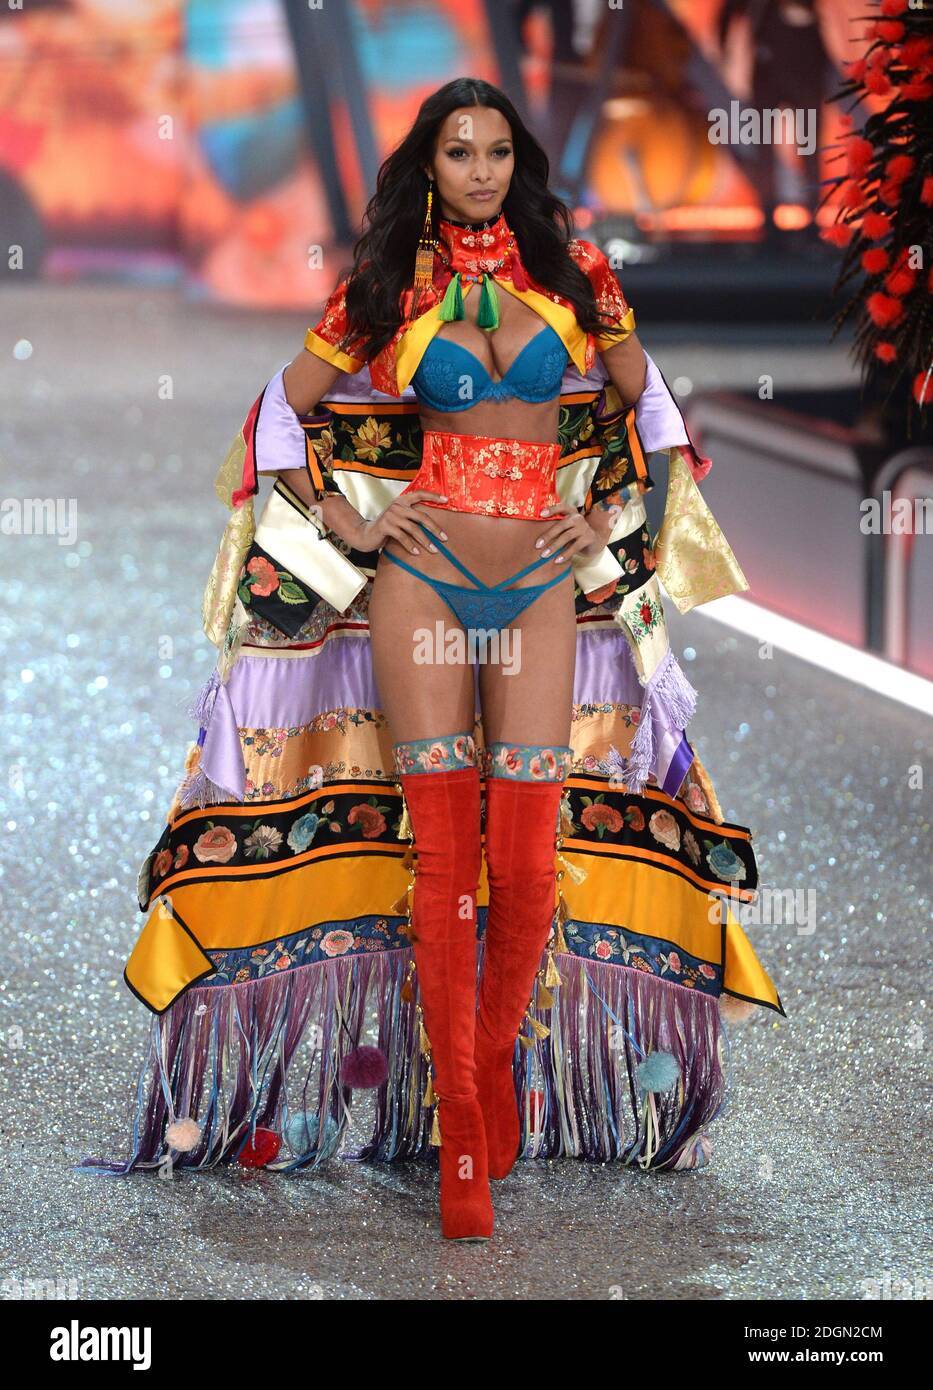 Lais Ribeiro on the catwalk for the Victoria's Secret Fashion Show at the  Mercedes-Benz Arena in Shanghai, China Stock Photo - Alamy